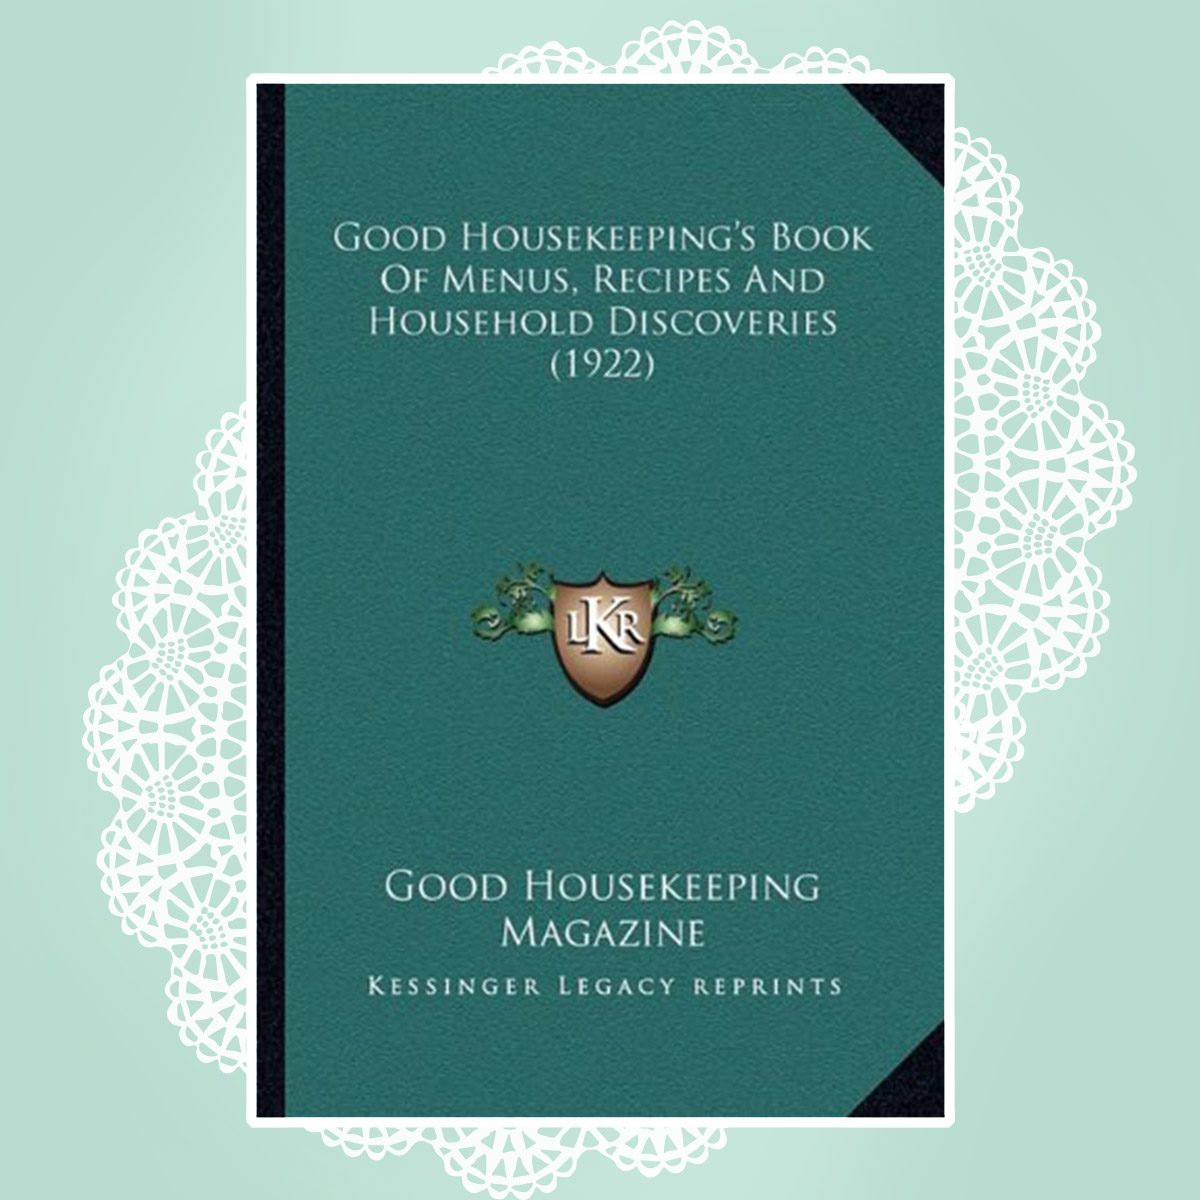 Good Housekeeping's Book Of Menus, Recipes And Household Discoveries